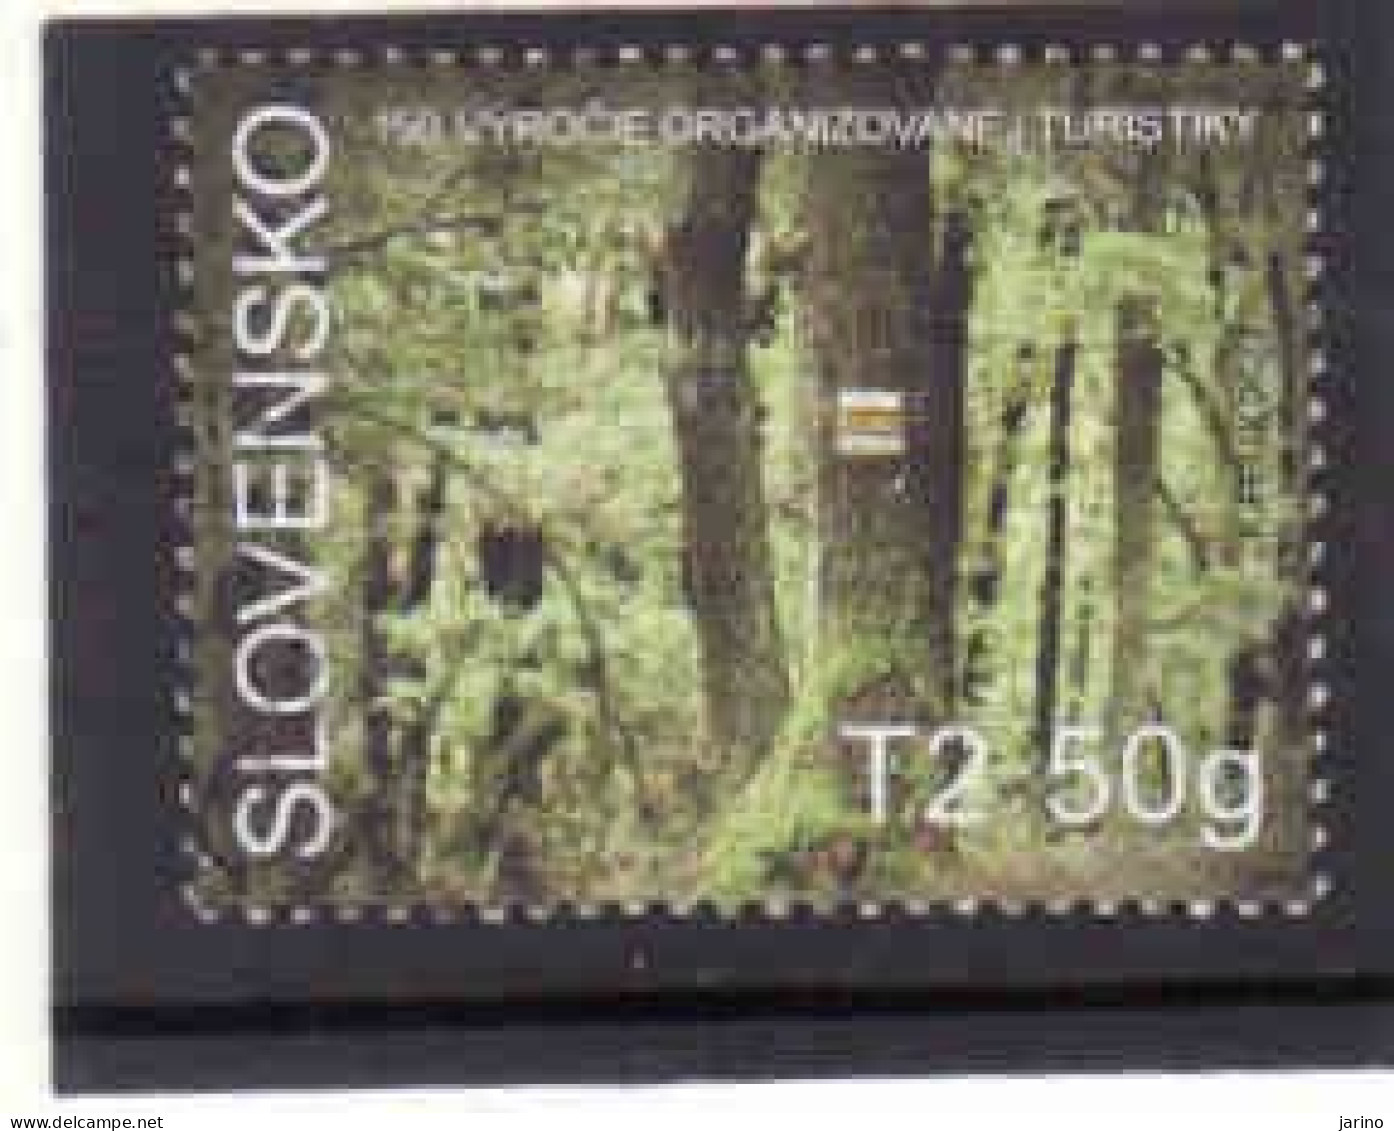 Slovakia 2023, Used.  I Will Complete Your Wantlist Of Czech Or Slovak Stamps According To The Michel Catalog. - Used Stamps